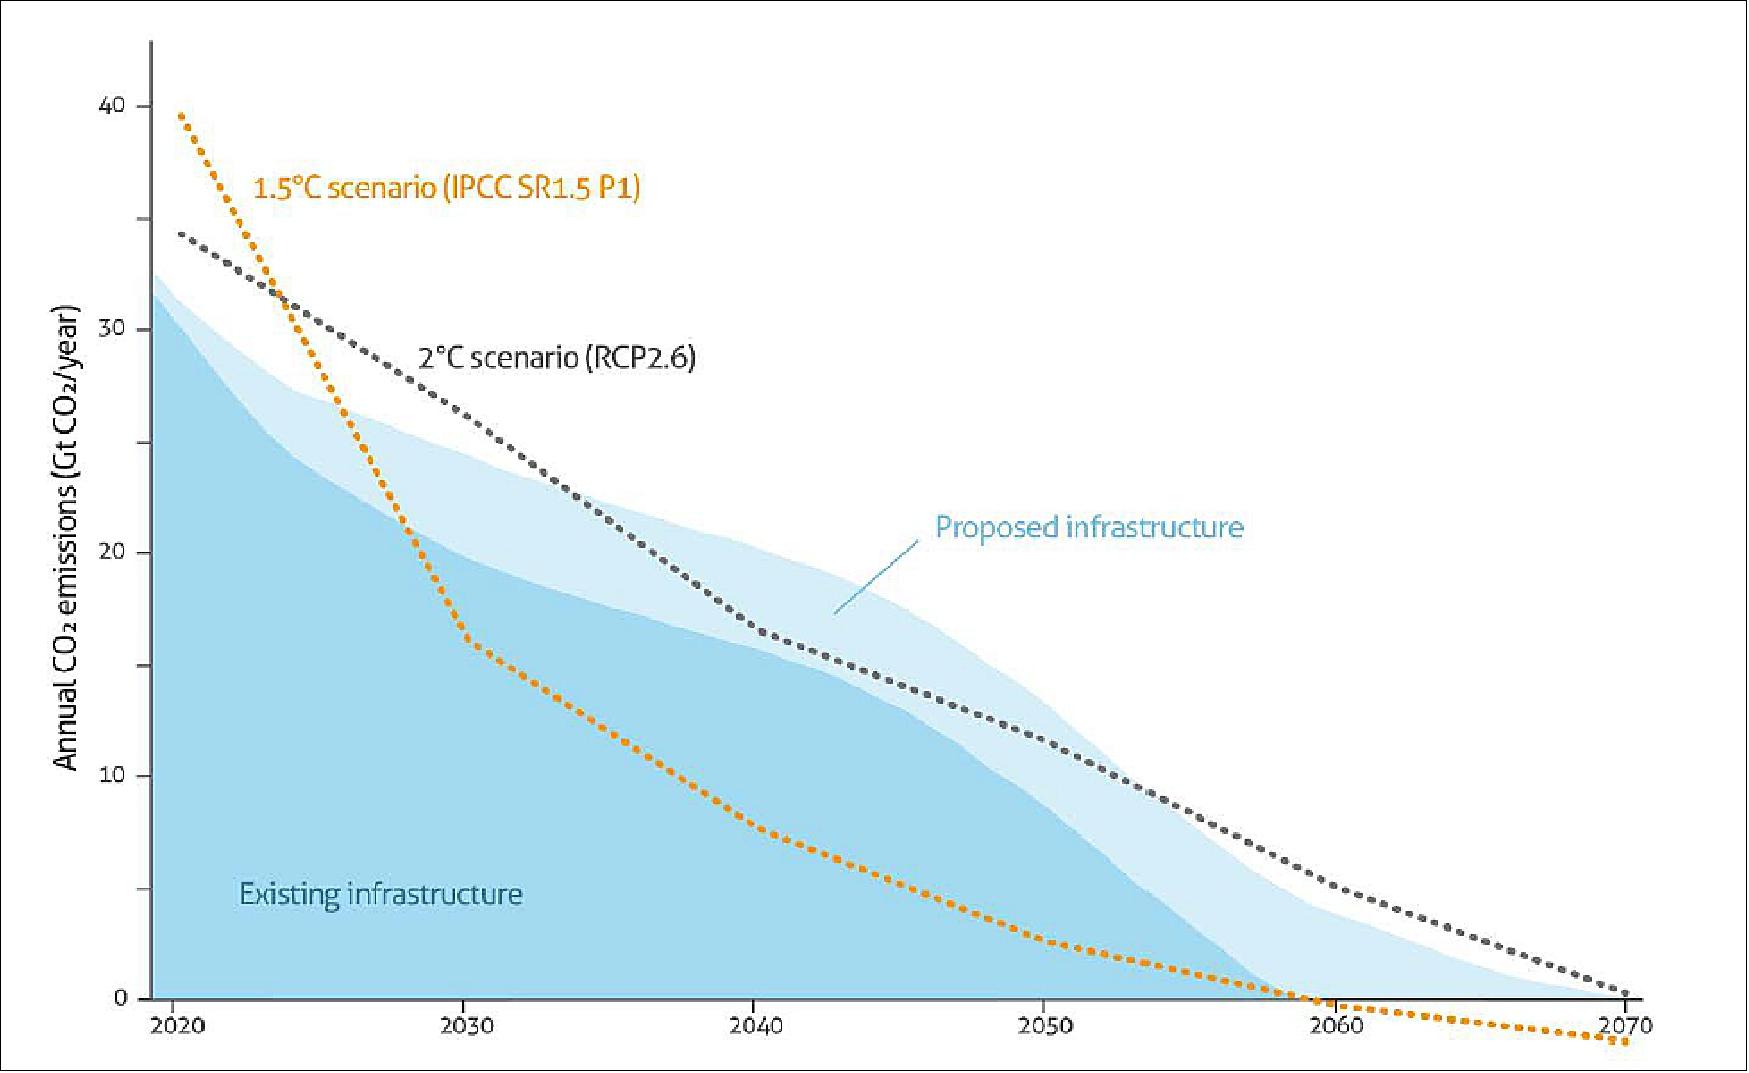 Figure 4: Committed emissions from fossil fuel infrastructure compared to pathways to 1.5ºC (IPCC SR1.5 P1) and 2ºC (RCP2.6). The committed emissions exclude some of the current CO2 sources, such as land-use change and the calcination process in cement manufacturing. Therefore, the 1.5ºC and 2ºC scenarios start at higher levels [image credit: Based on Tong et al, Nature, 2019 and Grubler et al, Nature Energy, 2018 (extracted from 10 New Insights in Climate Science report)] 6)